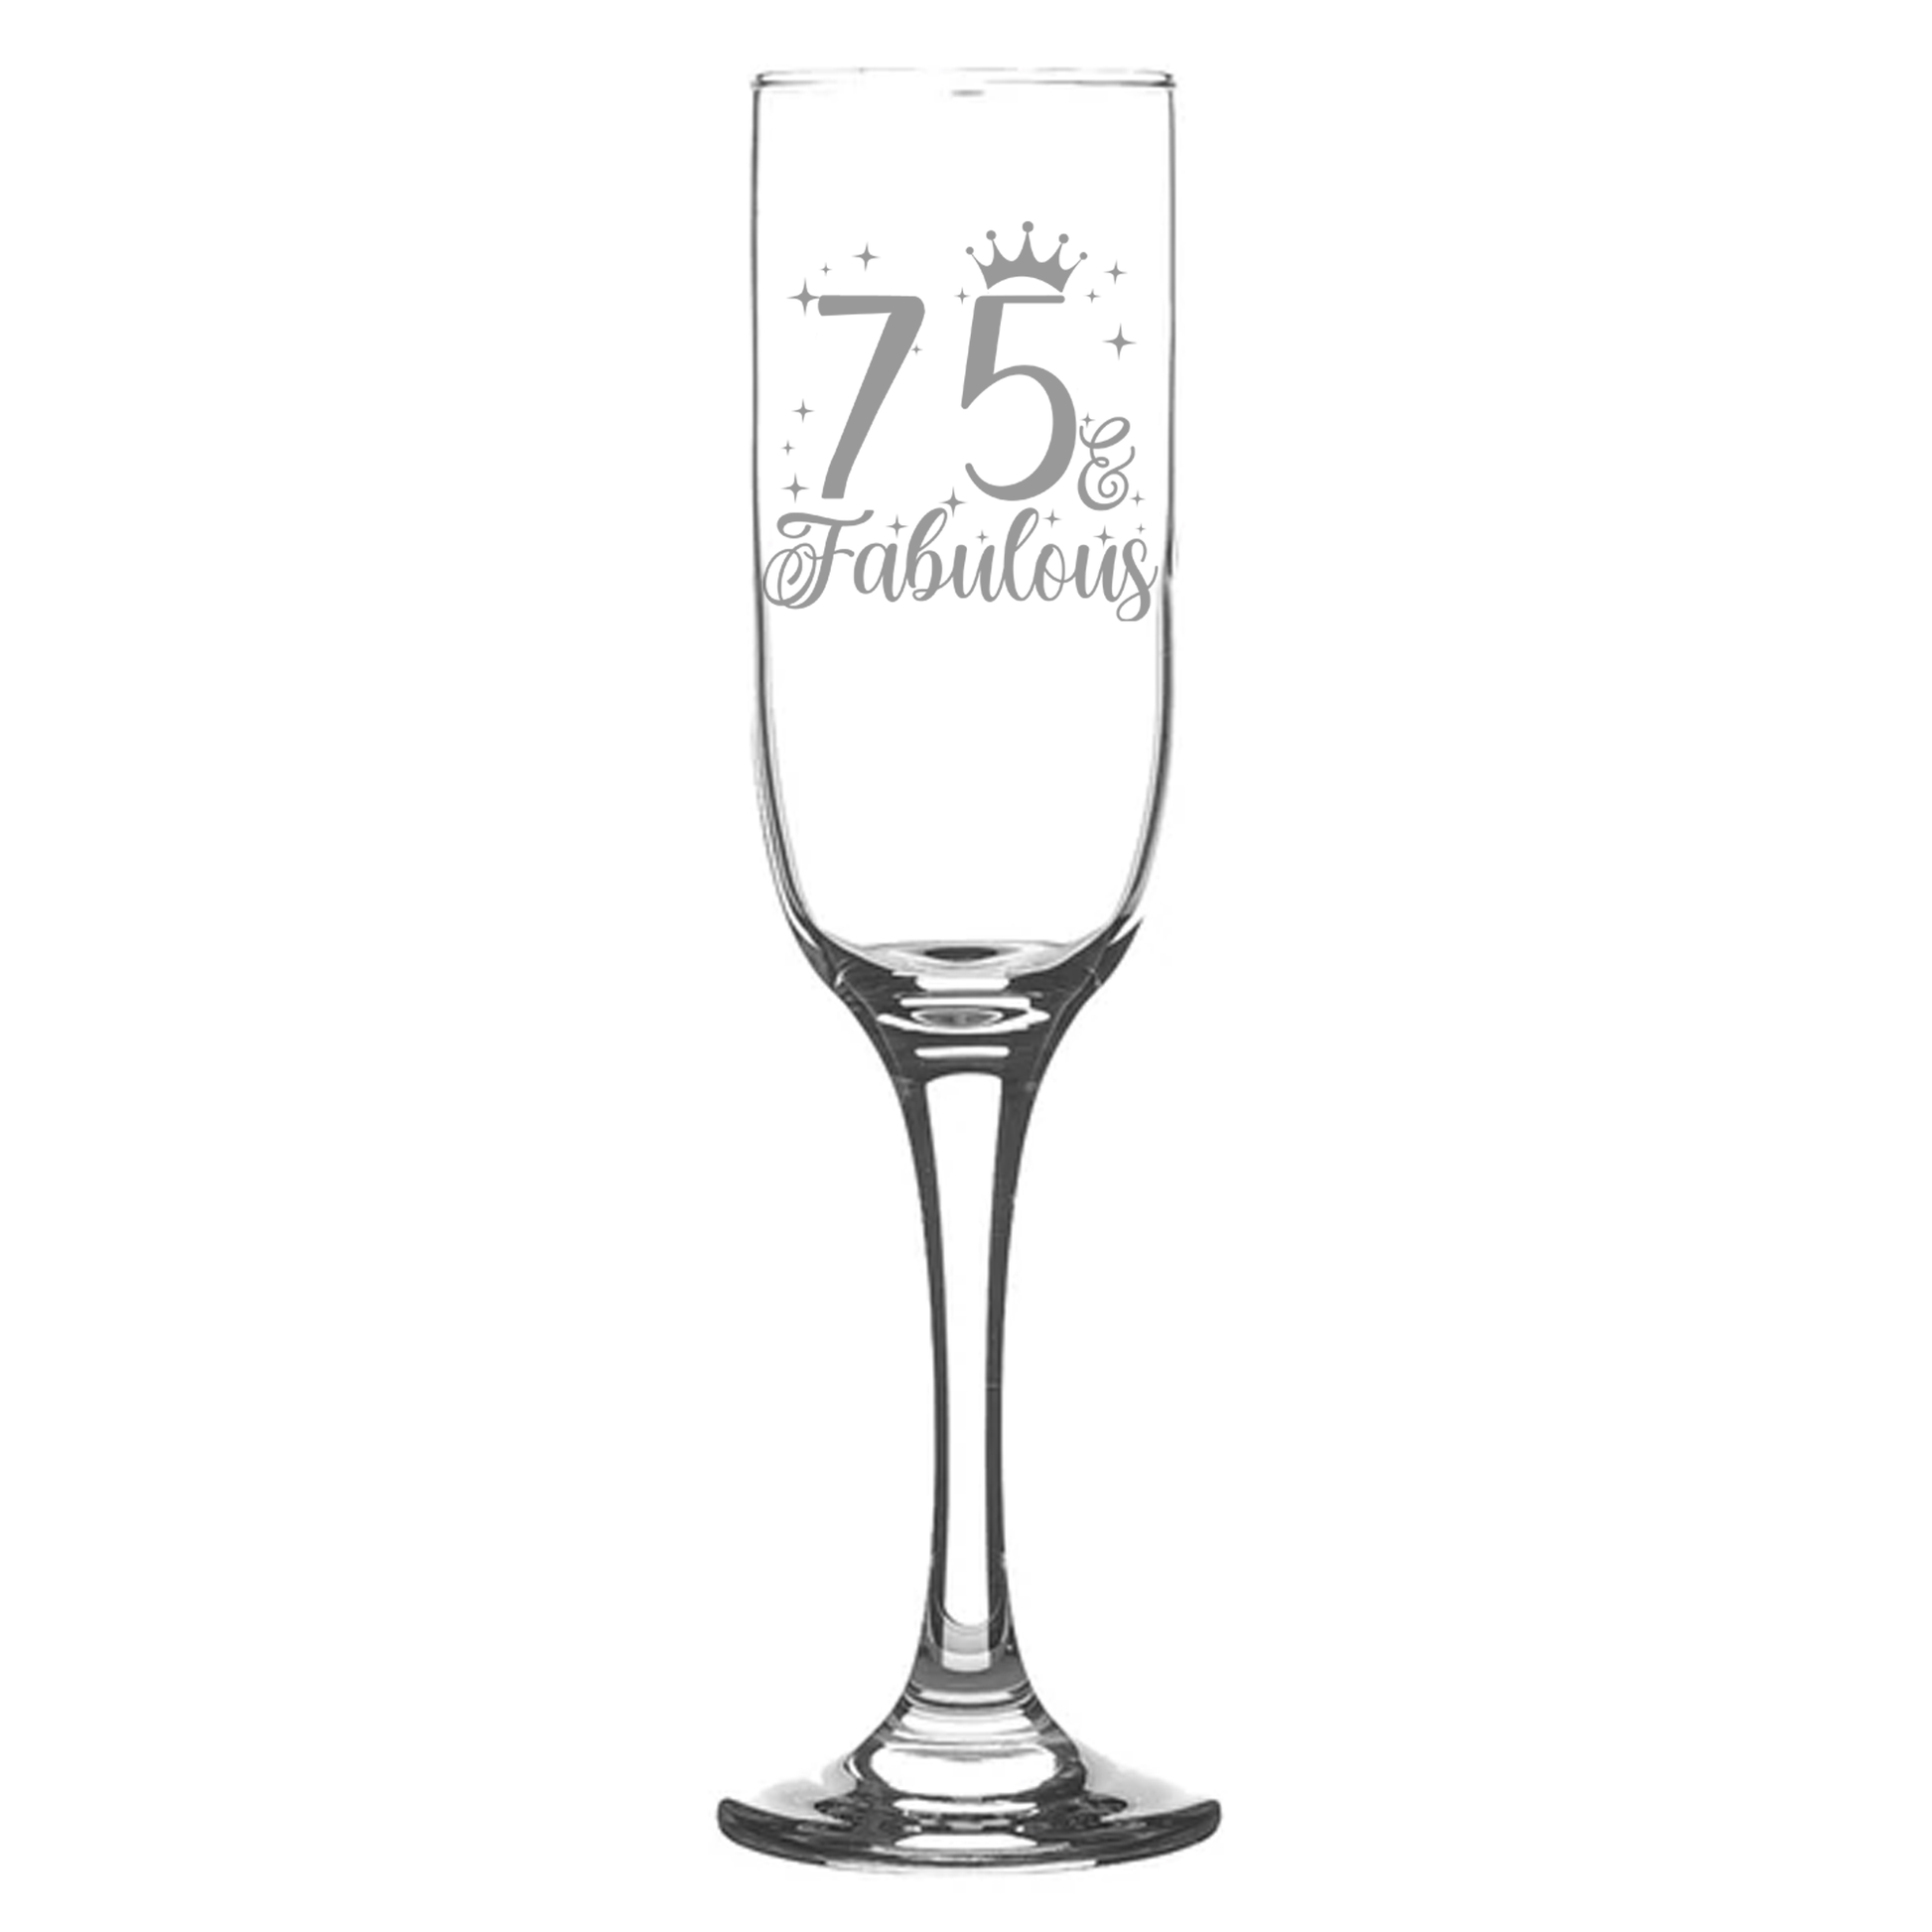 75 & Fabulous Engraved Champagne Glass and/or Coaster Set  - Always Looking Good - Champagne Glass On Its Own  